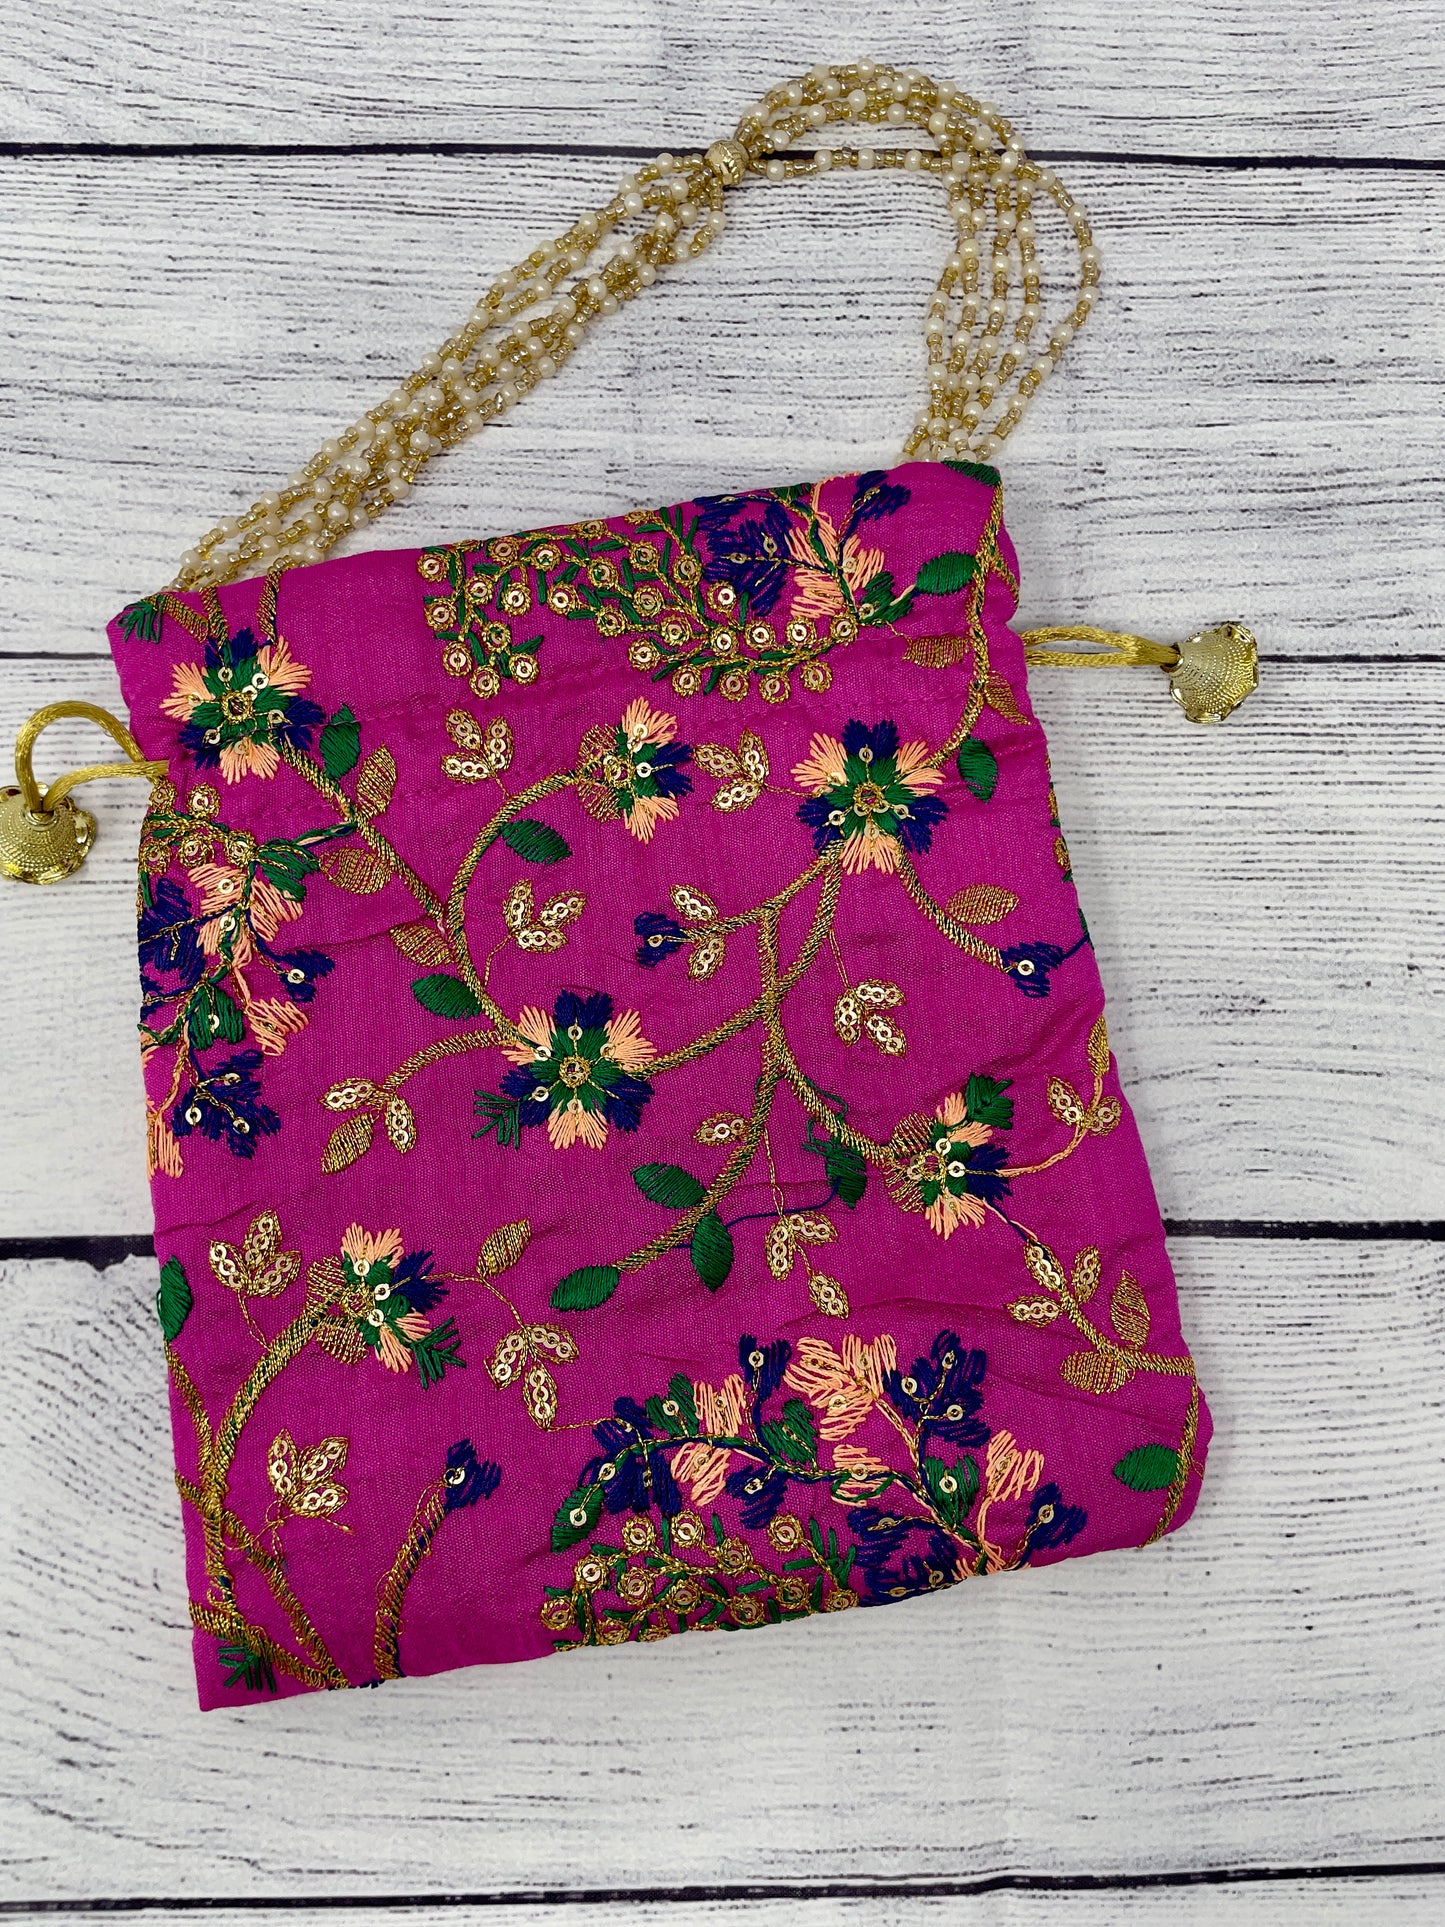 Floral Embroidery Potli Bag - 5 Pack